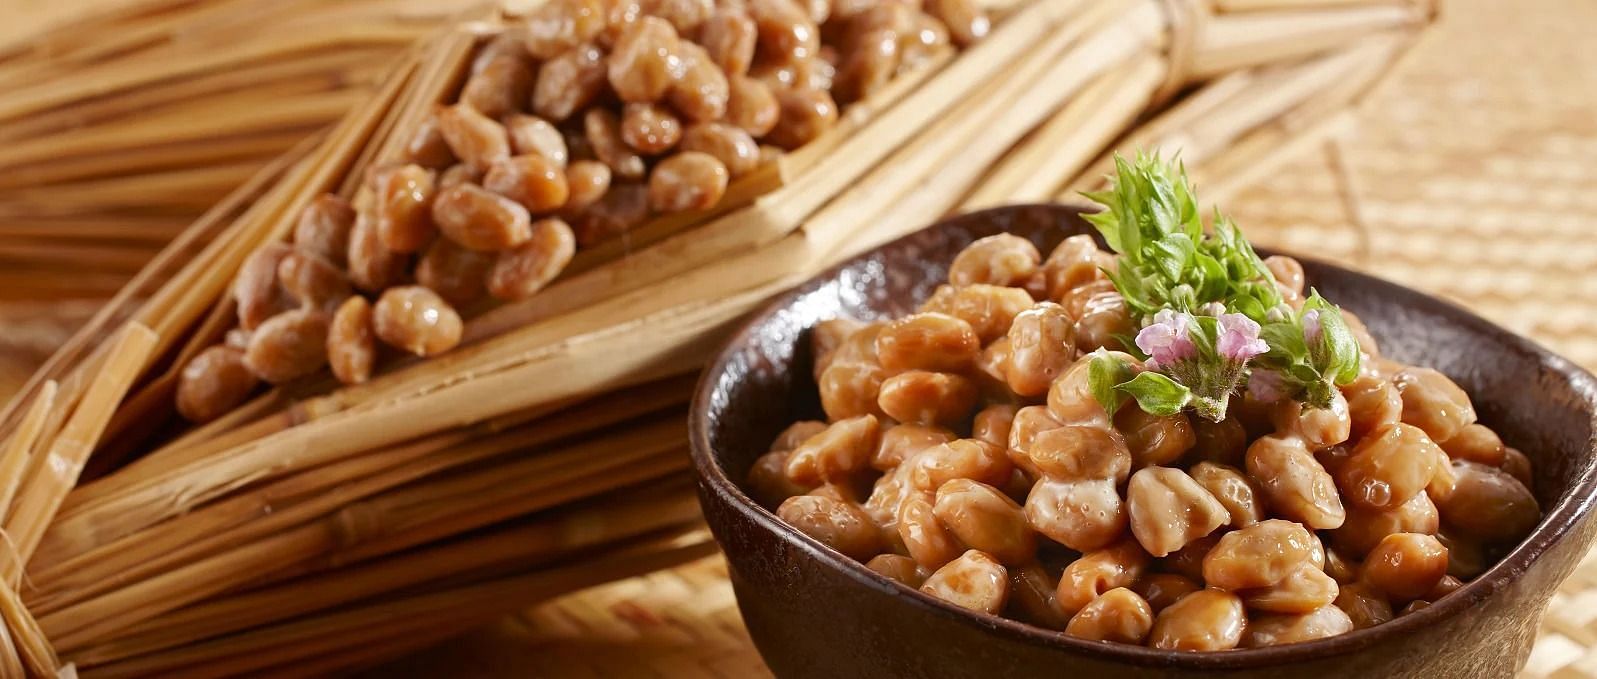 Natto (Image sourced from Arthur Andrew Medical)